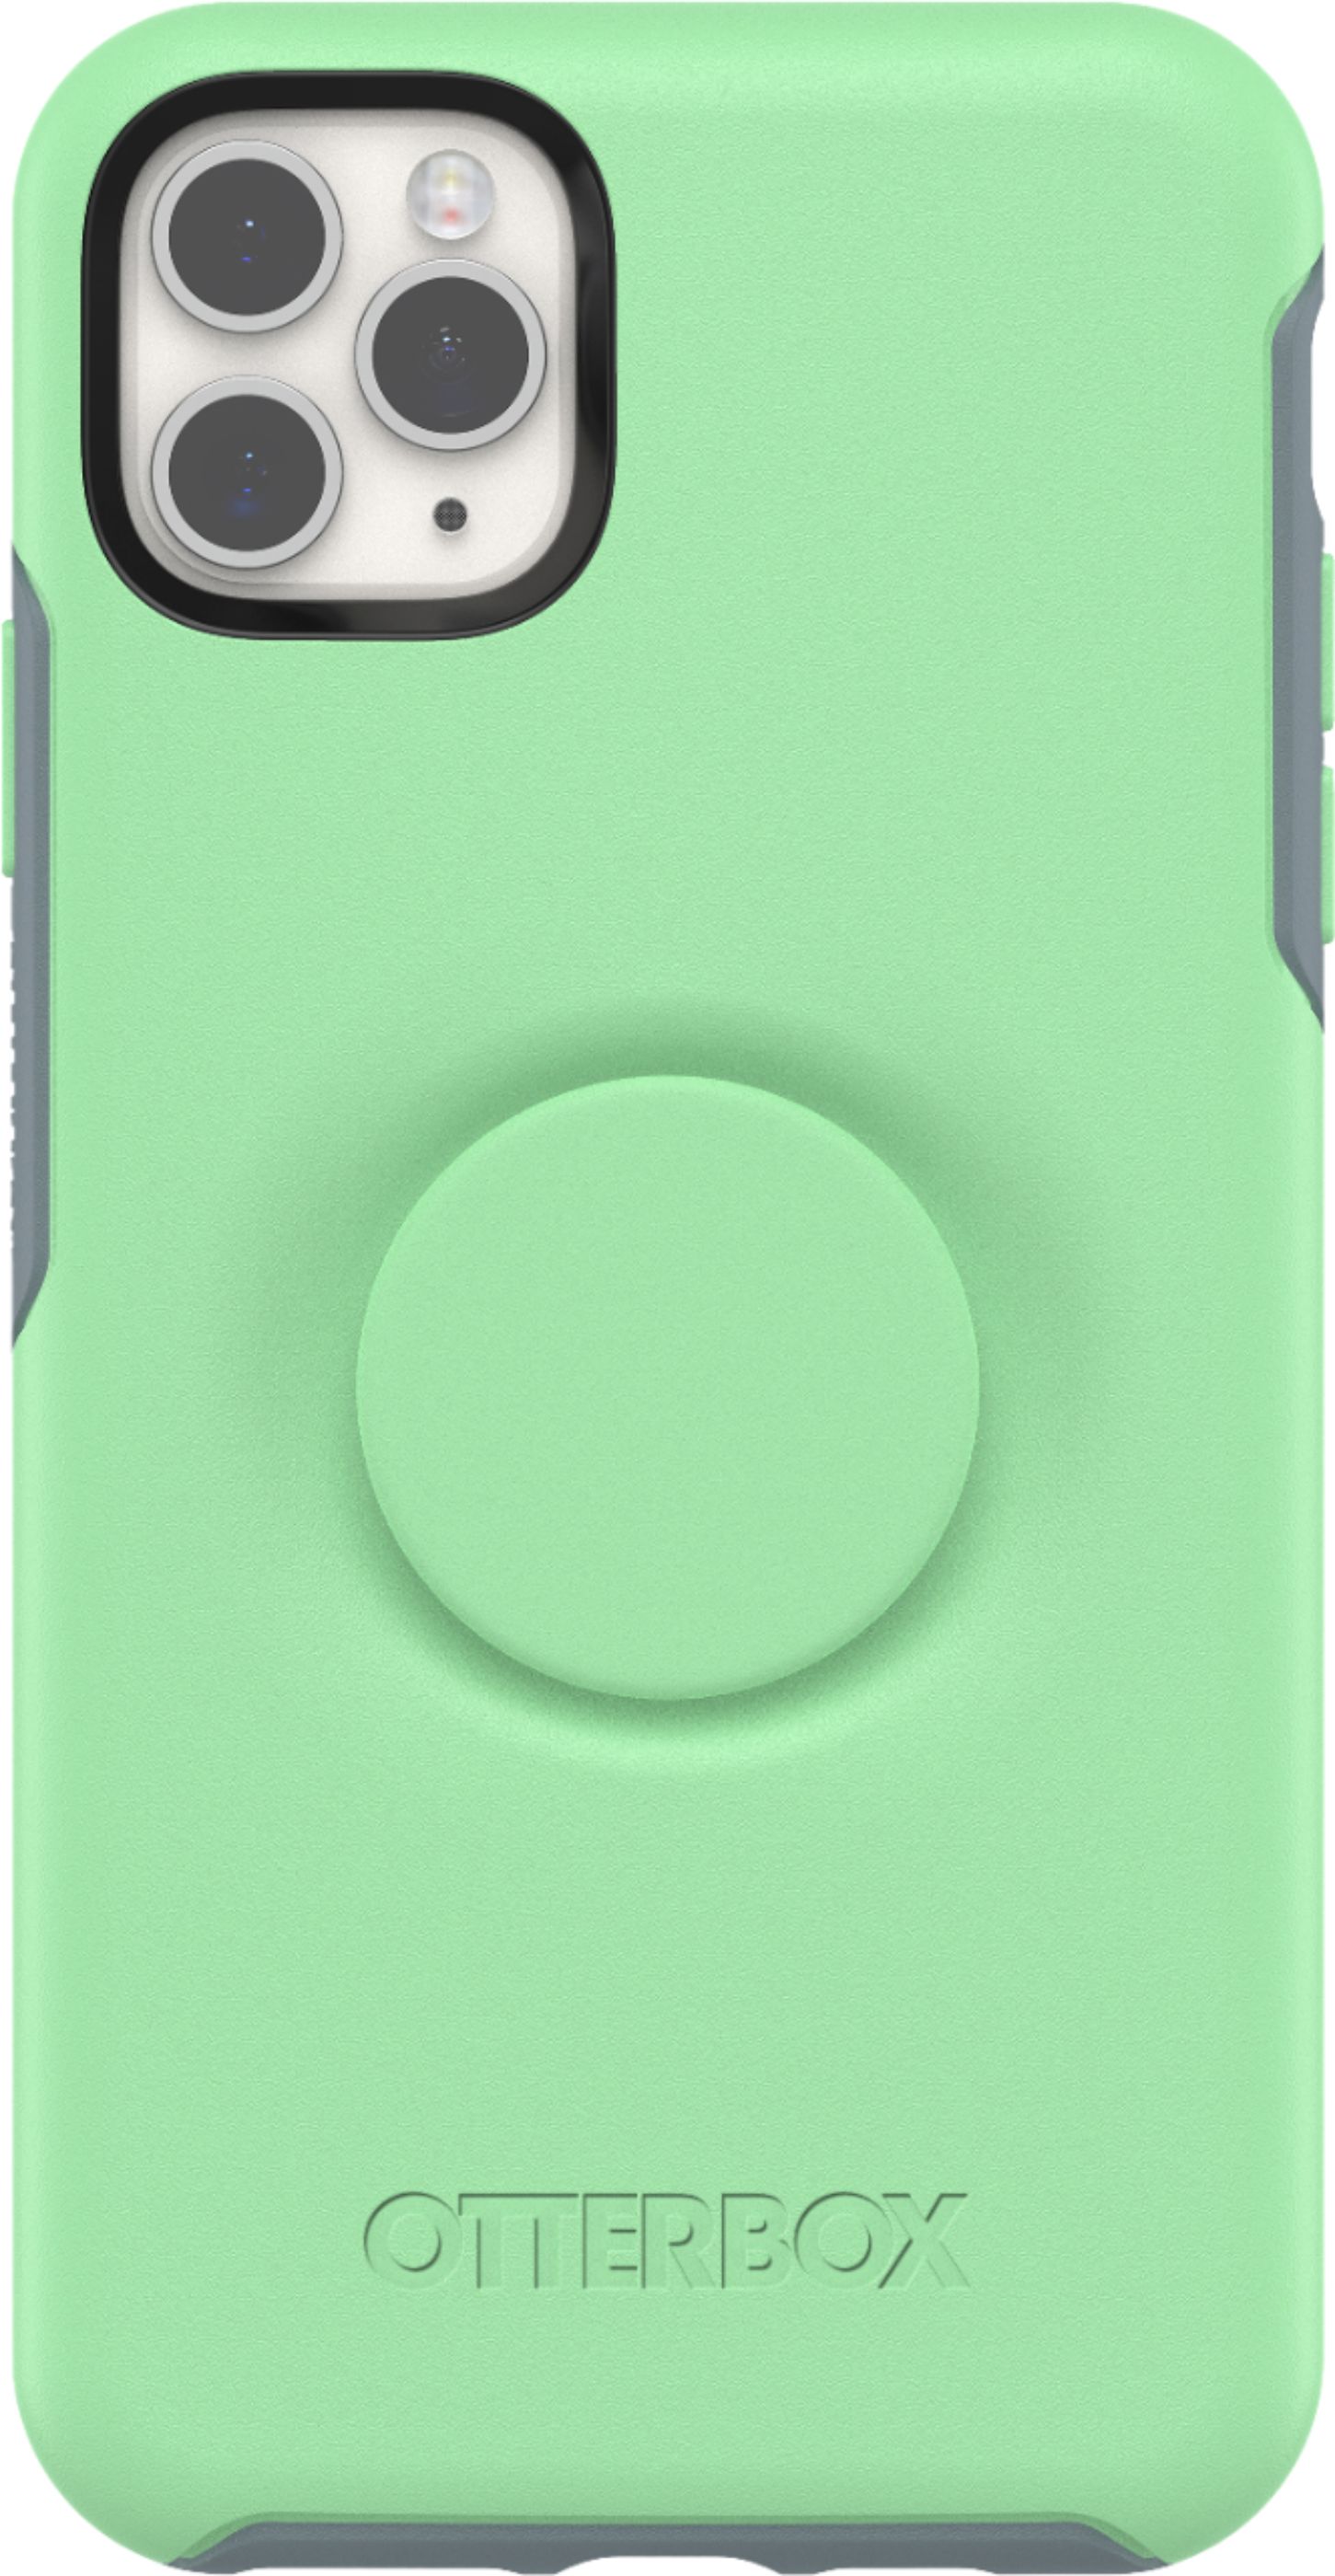 Otterbox Pop Symmetry Series Case For Apple Iphone 11 Pro Max Mint Green 77 Best Buy